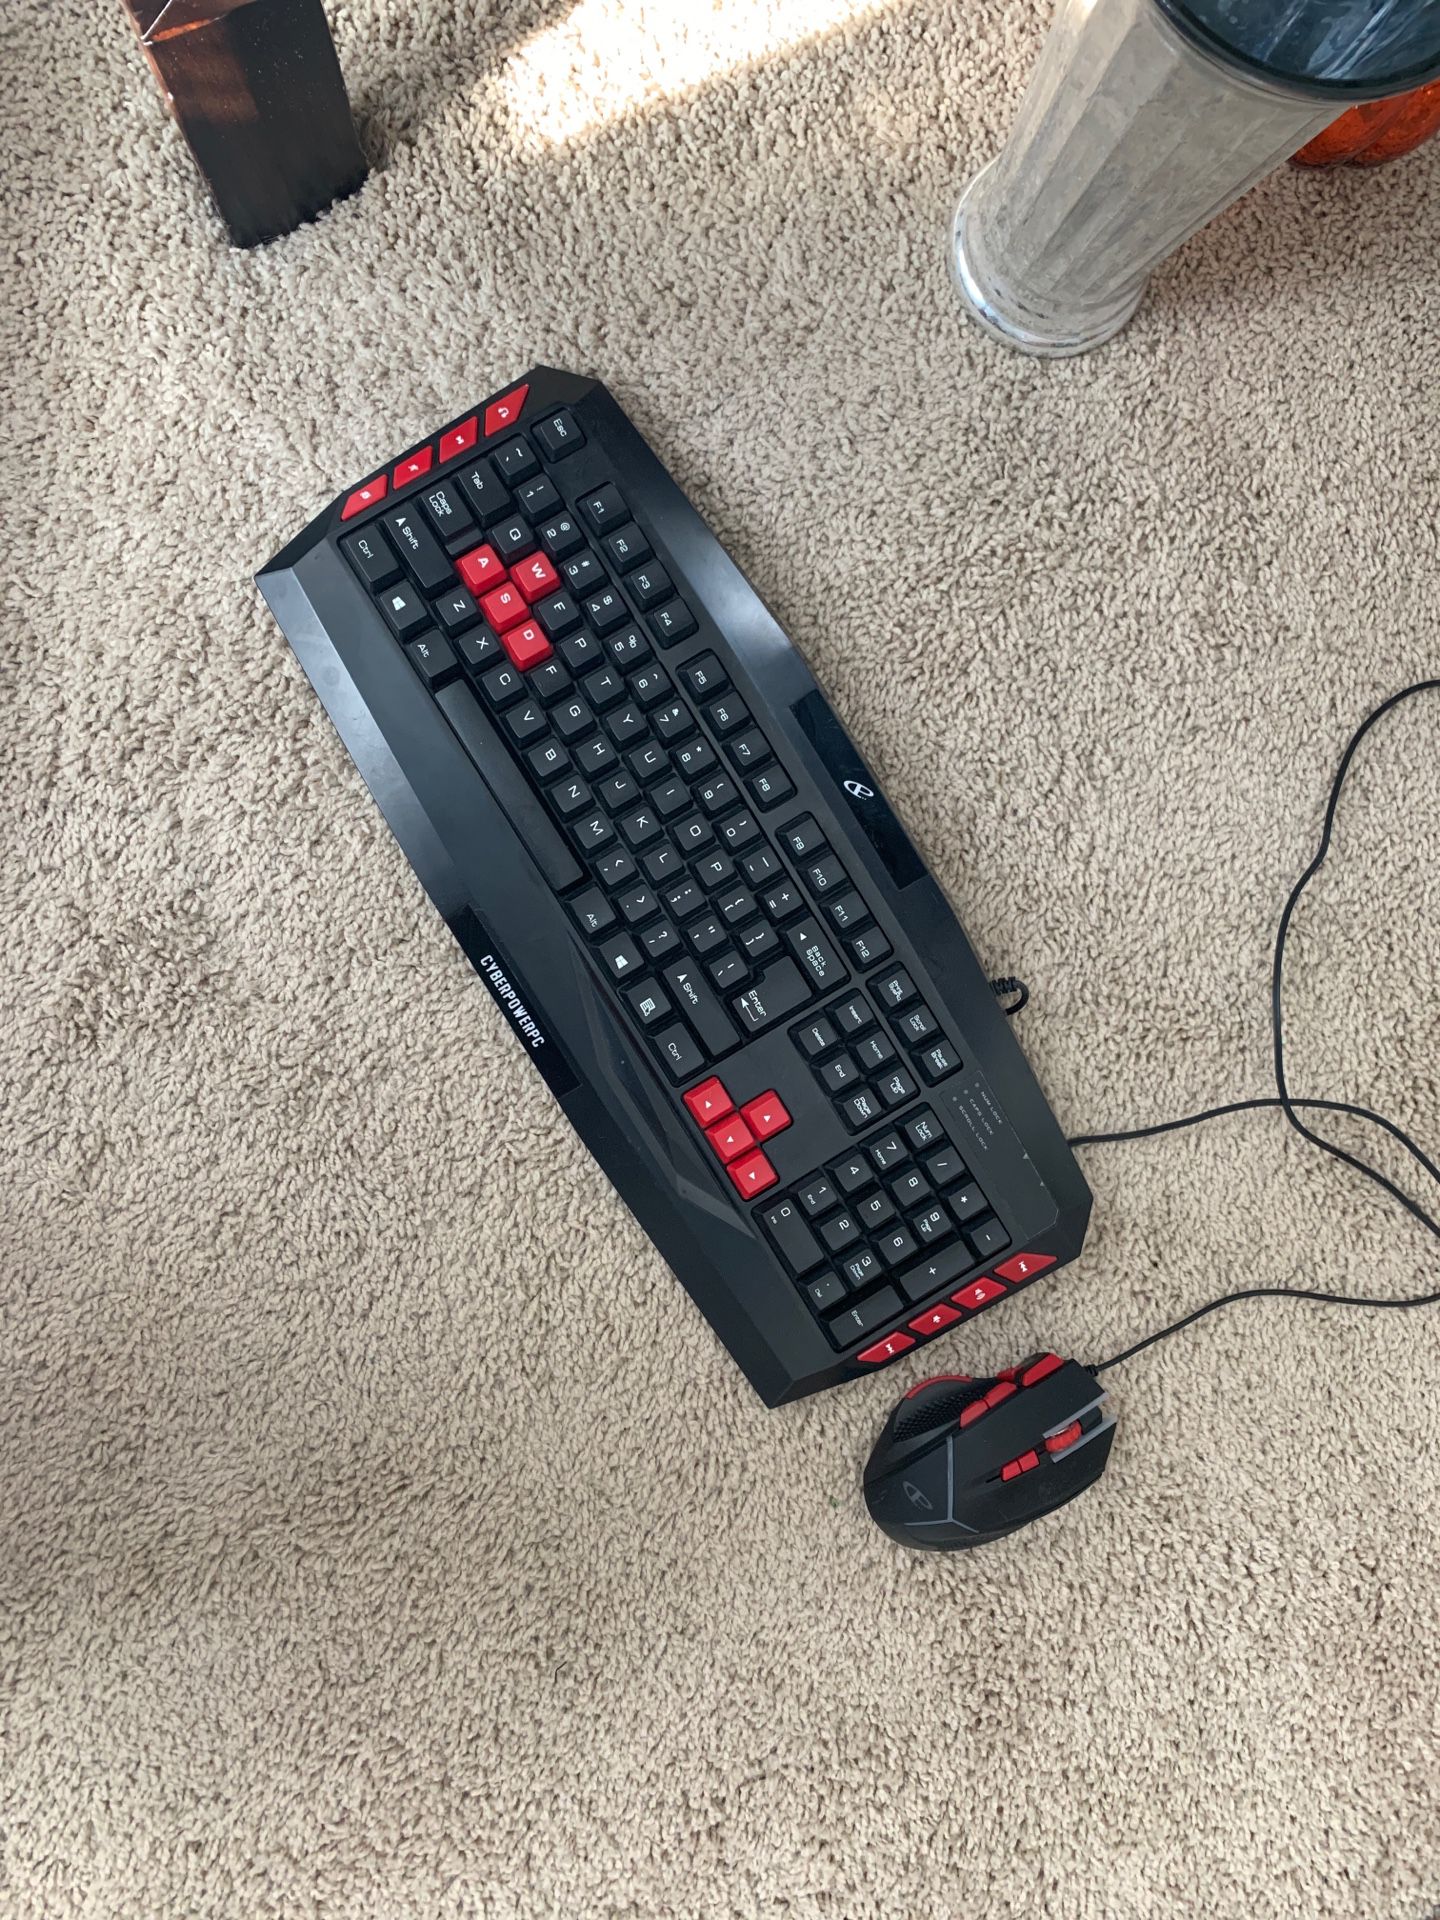 Cyberpowerpc keyboard and mouse